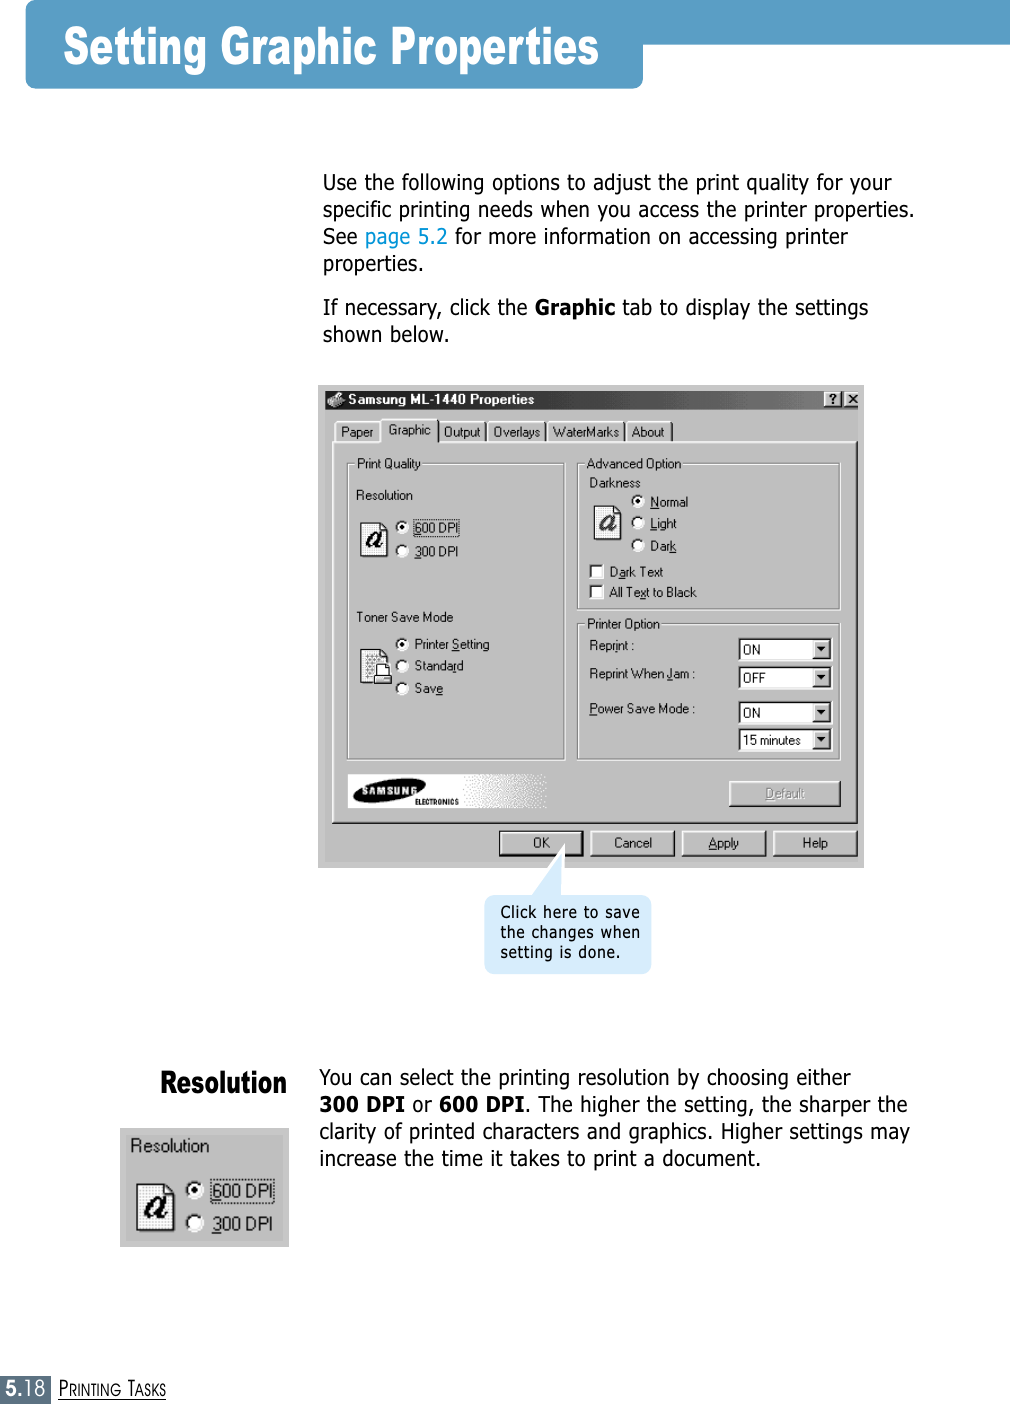 5.18PRINTING TASKSYou can select the printing resolution by choosing either 300 DPI or 600 DPI. The higher the setting, the sharper theclarity of printed characters and graphics. Higher settings mayincrease the time it takes to print a document.ResolutionUse the following options to adjust the print quality for yourspecific printing needs when you access the printer properties.See page 5.2 for more information on accessing printerproperties. If necessary, click the Graphic tab to display the settingsshown below.Setting Graphic PropertiesClick here to savethe changes whensetting is done.